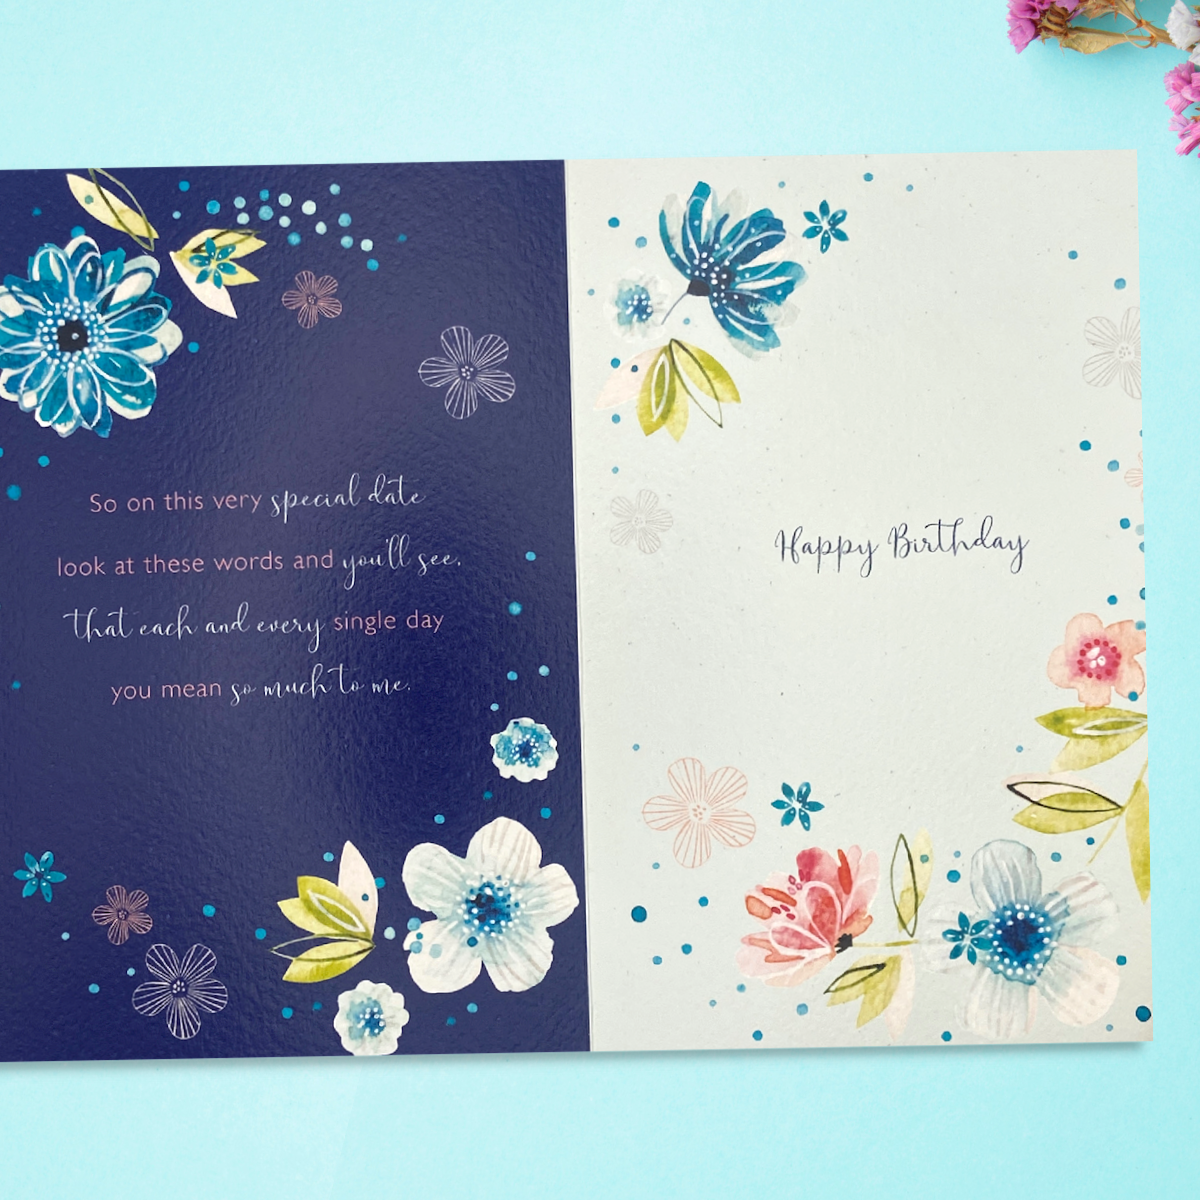 Last two pages with floral decoration and verse